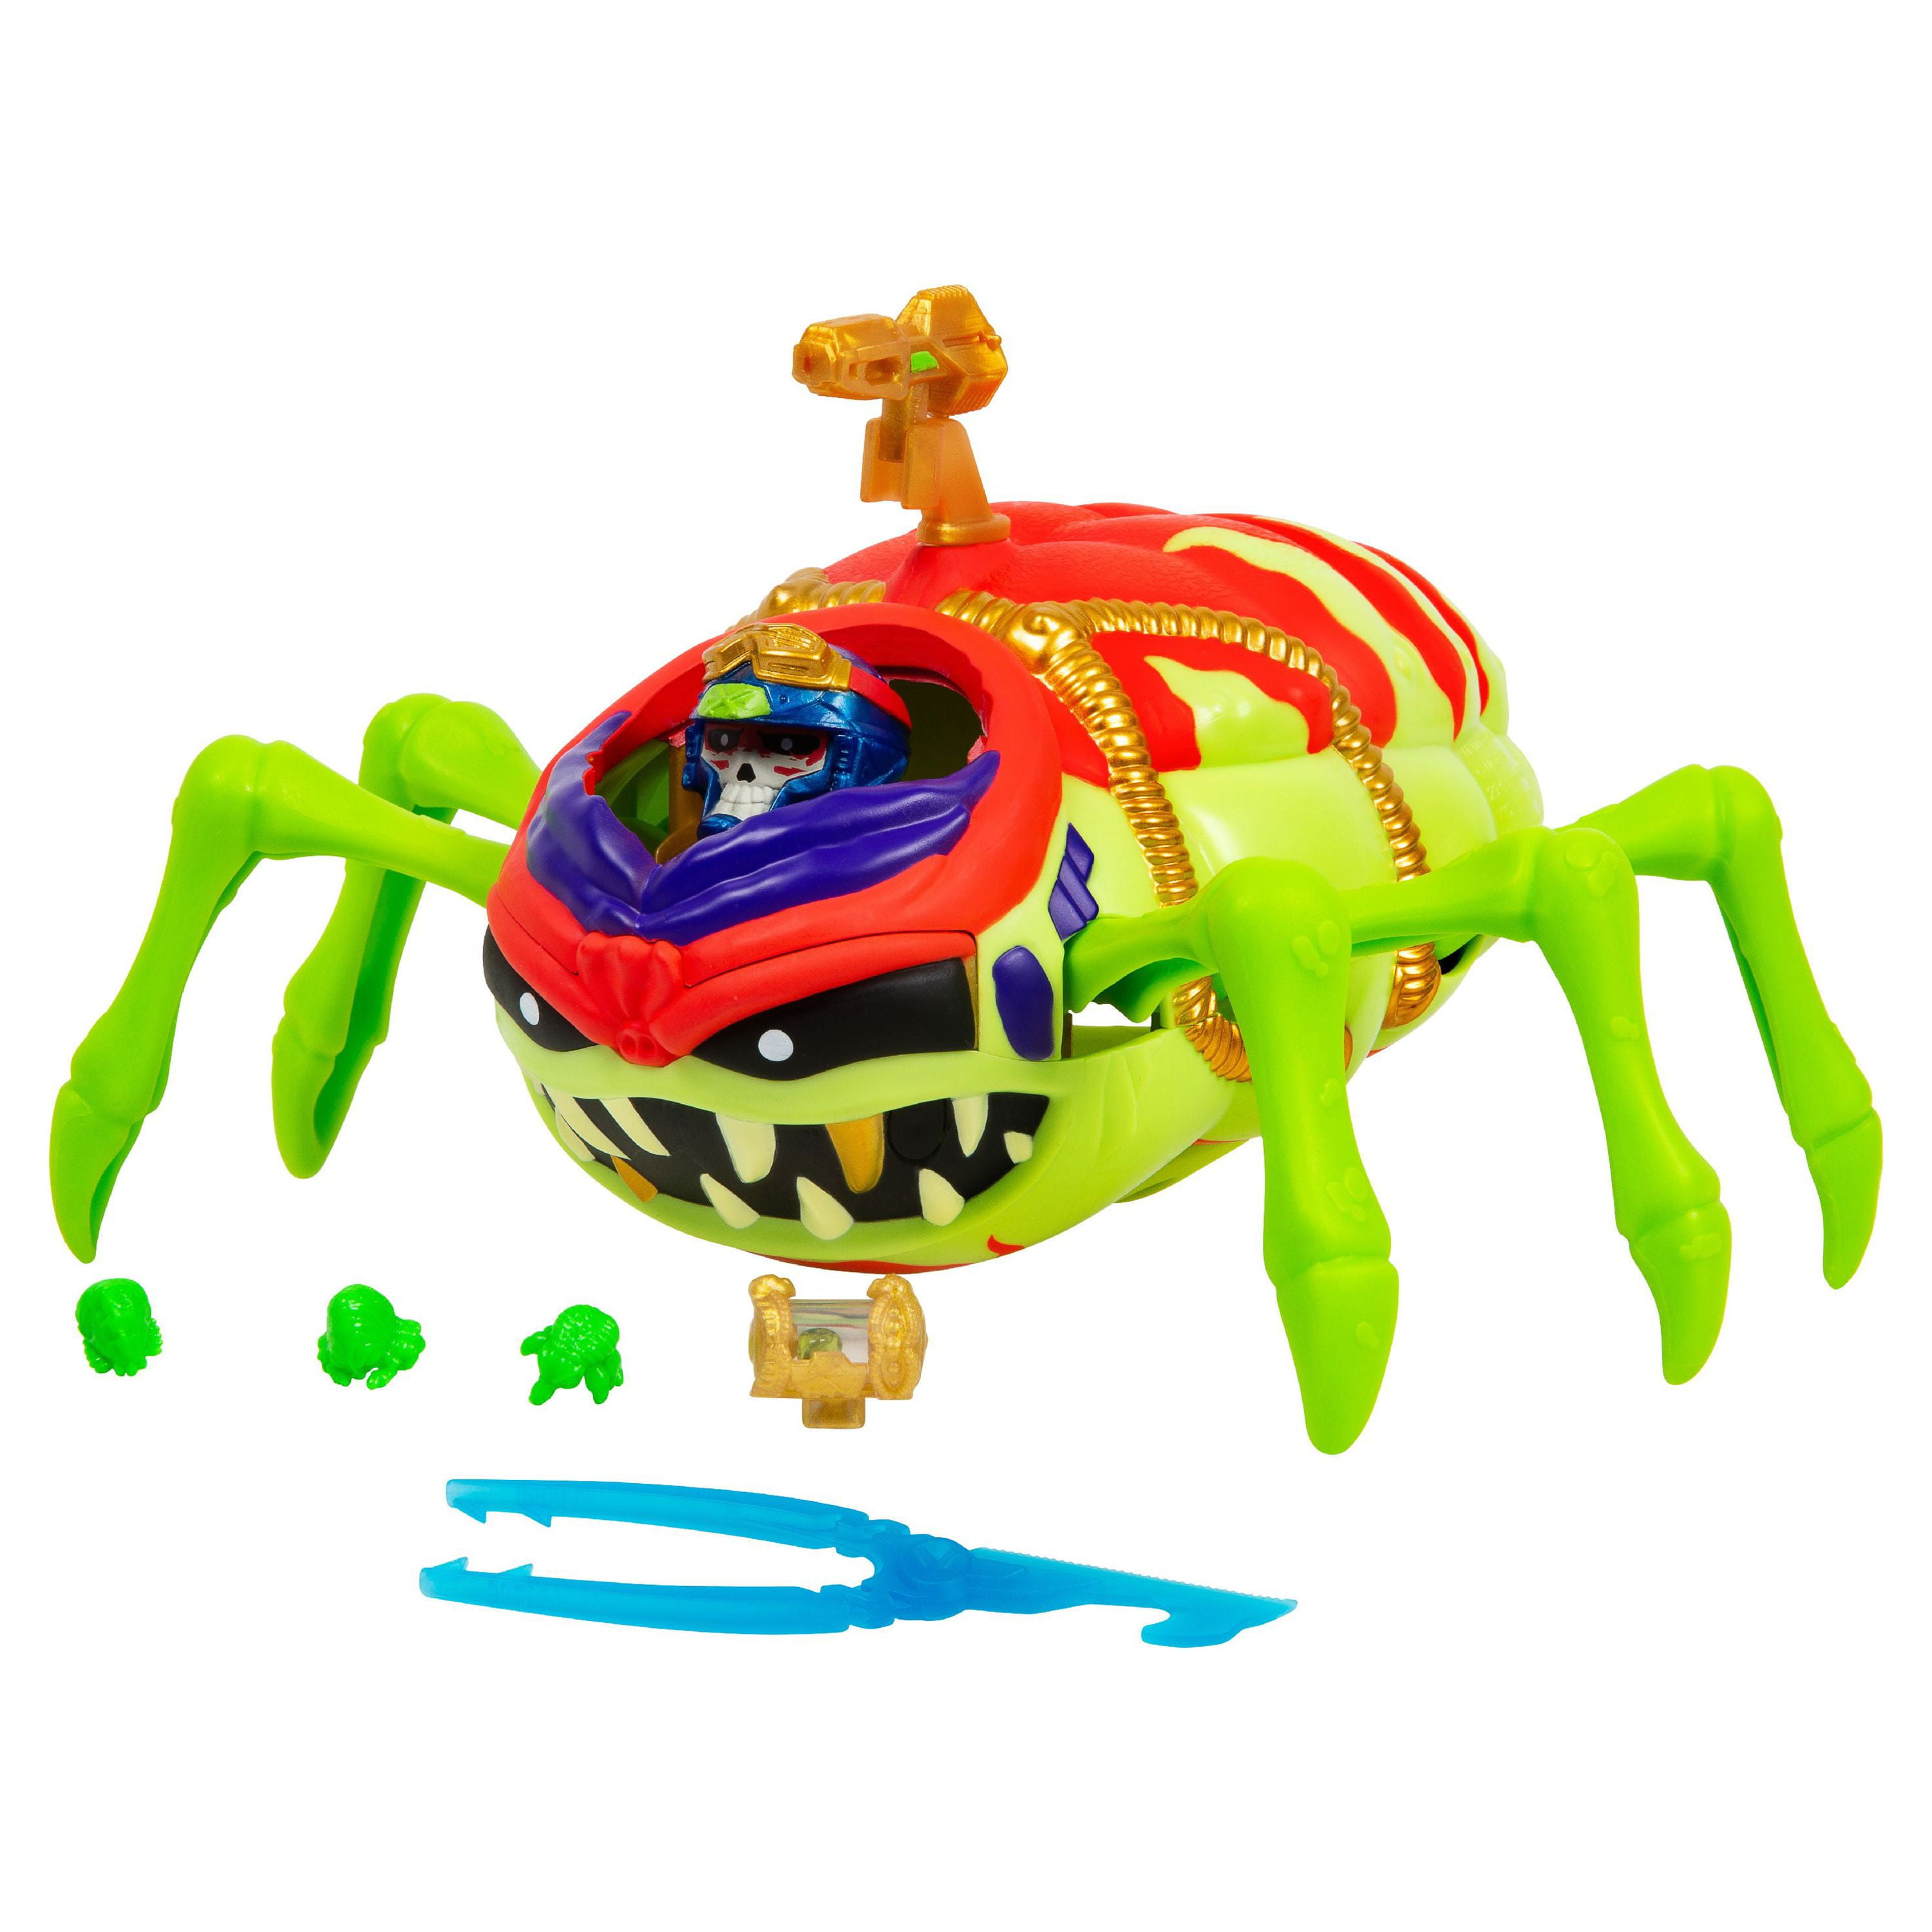 Alien Treasure X Dissection Wind Up Toy Slime Action Figure For Wind Up Toy  Search 230626 From Bian07, $17.36